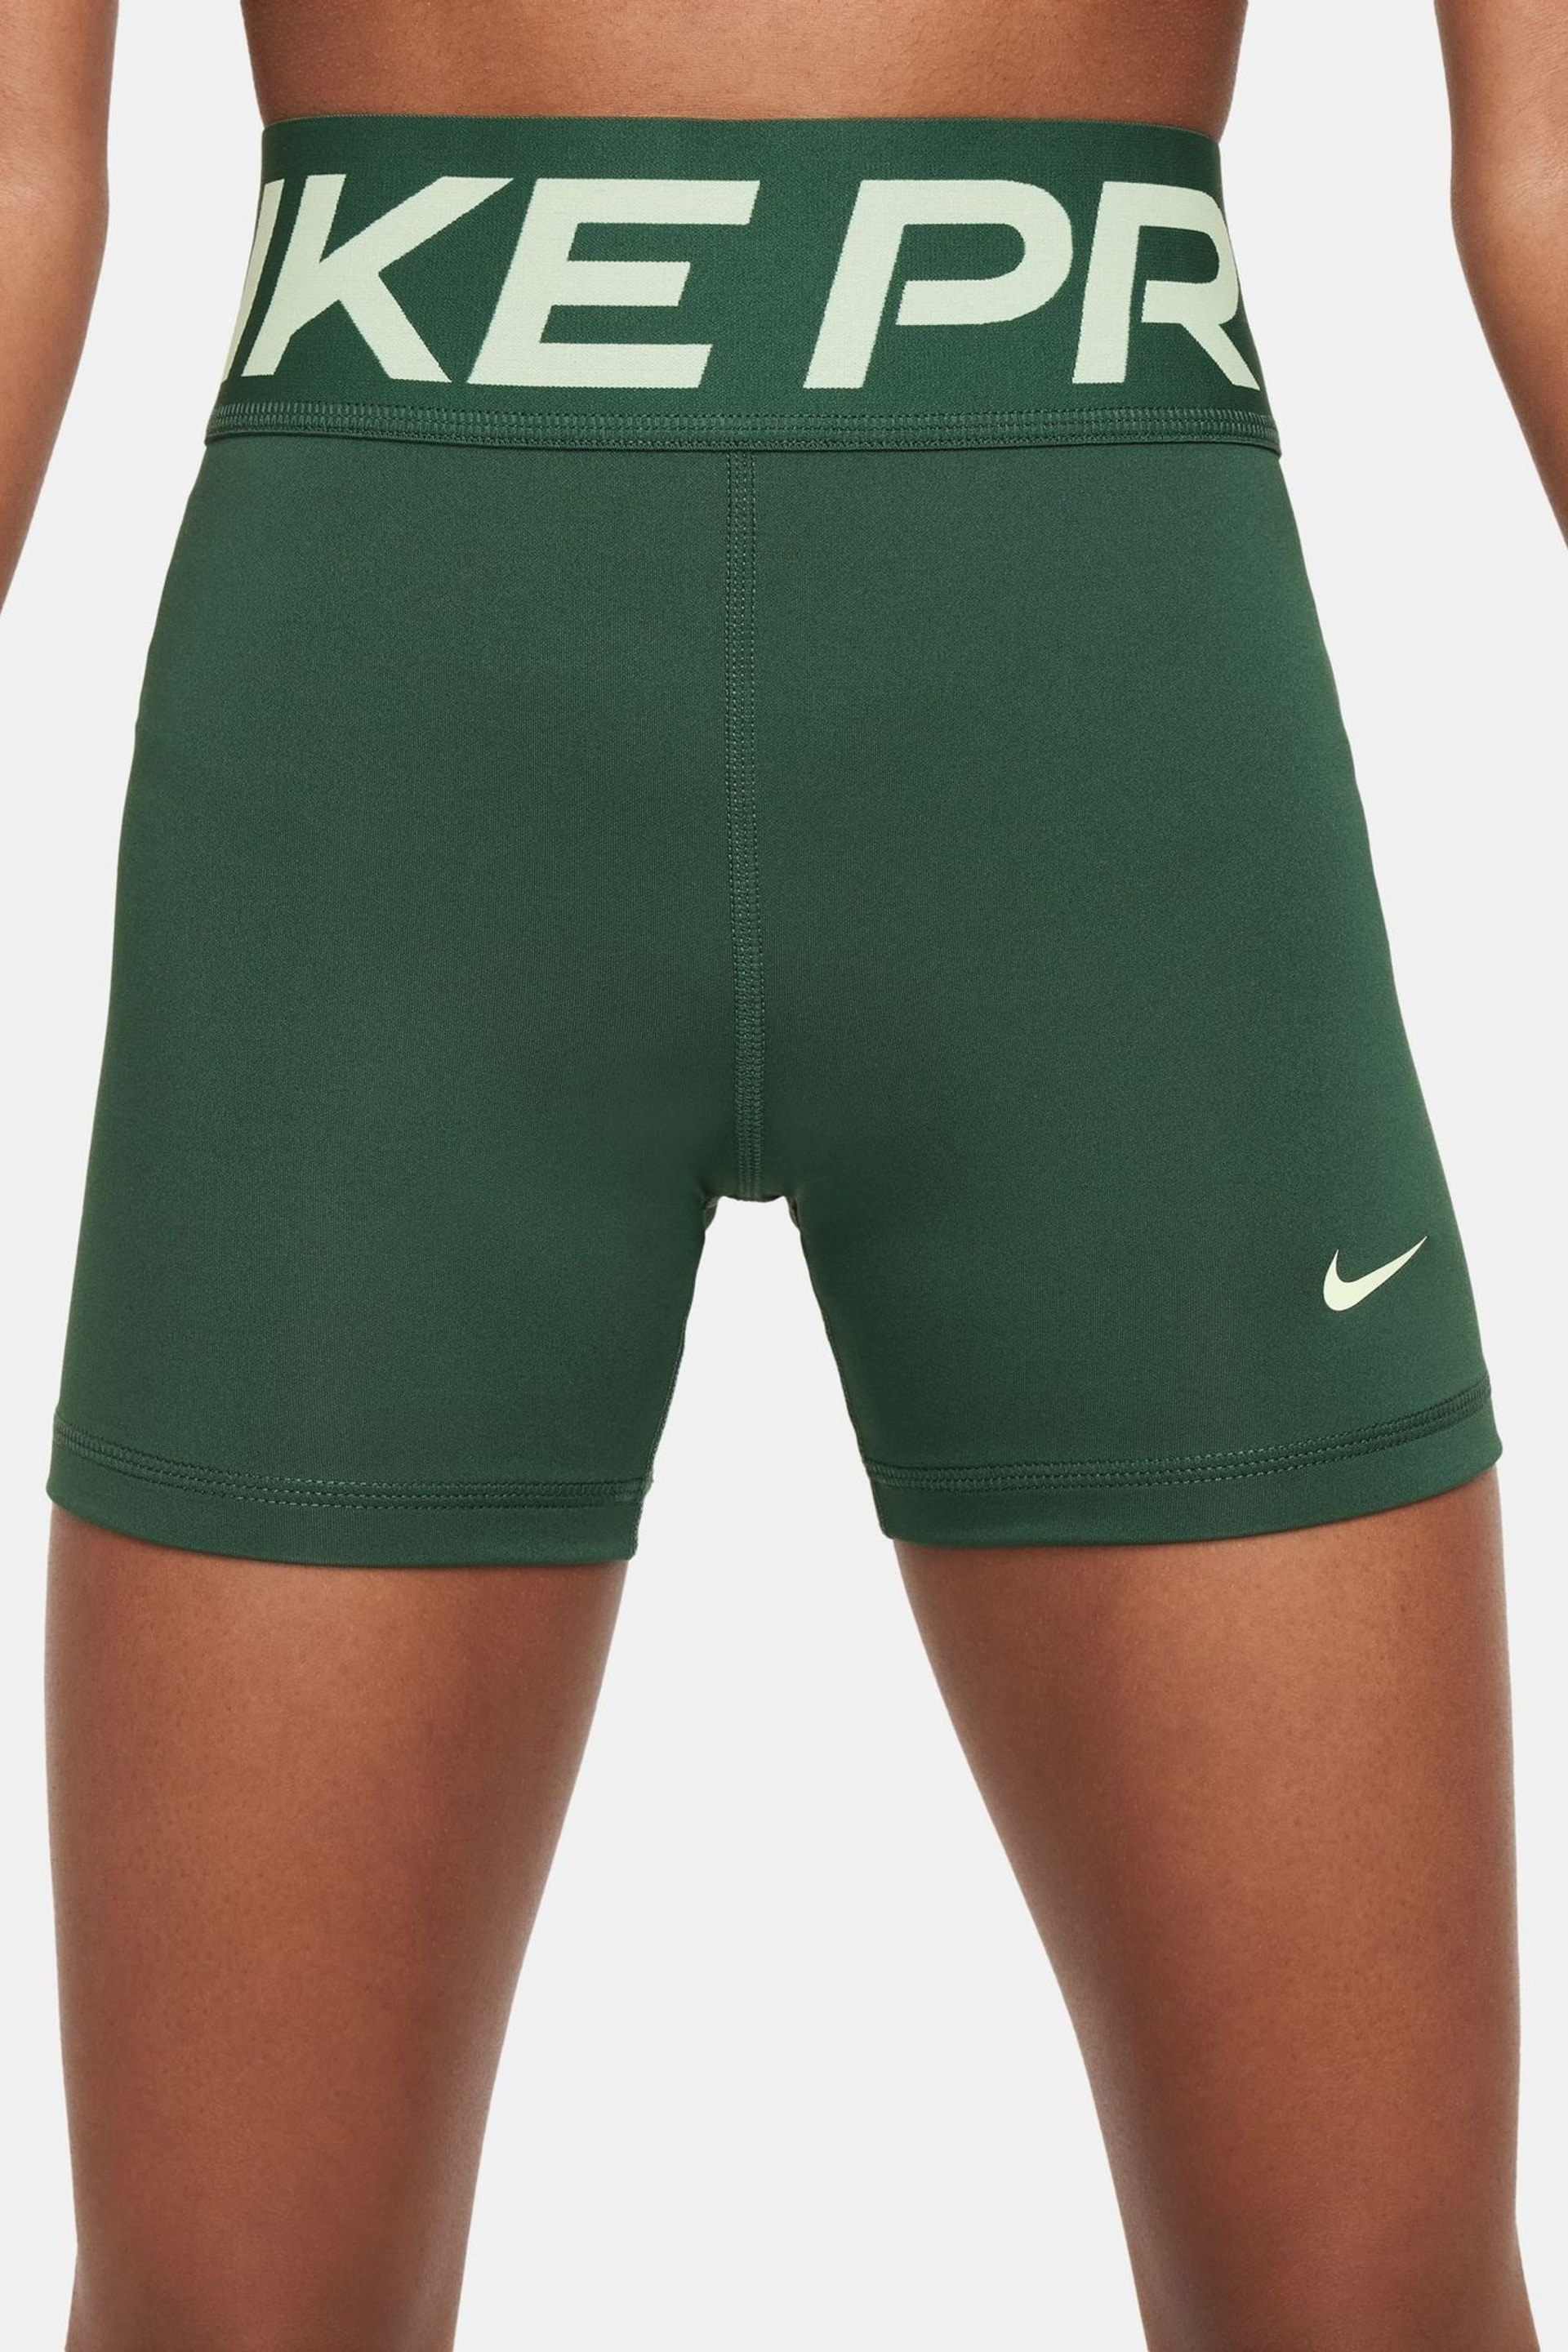 Nike Green Pro Dri-FIT 3 Inch Shorts - Image 2 of 6